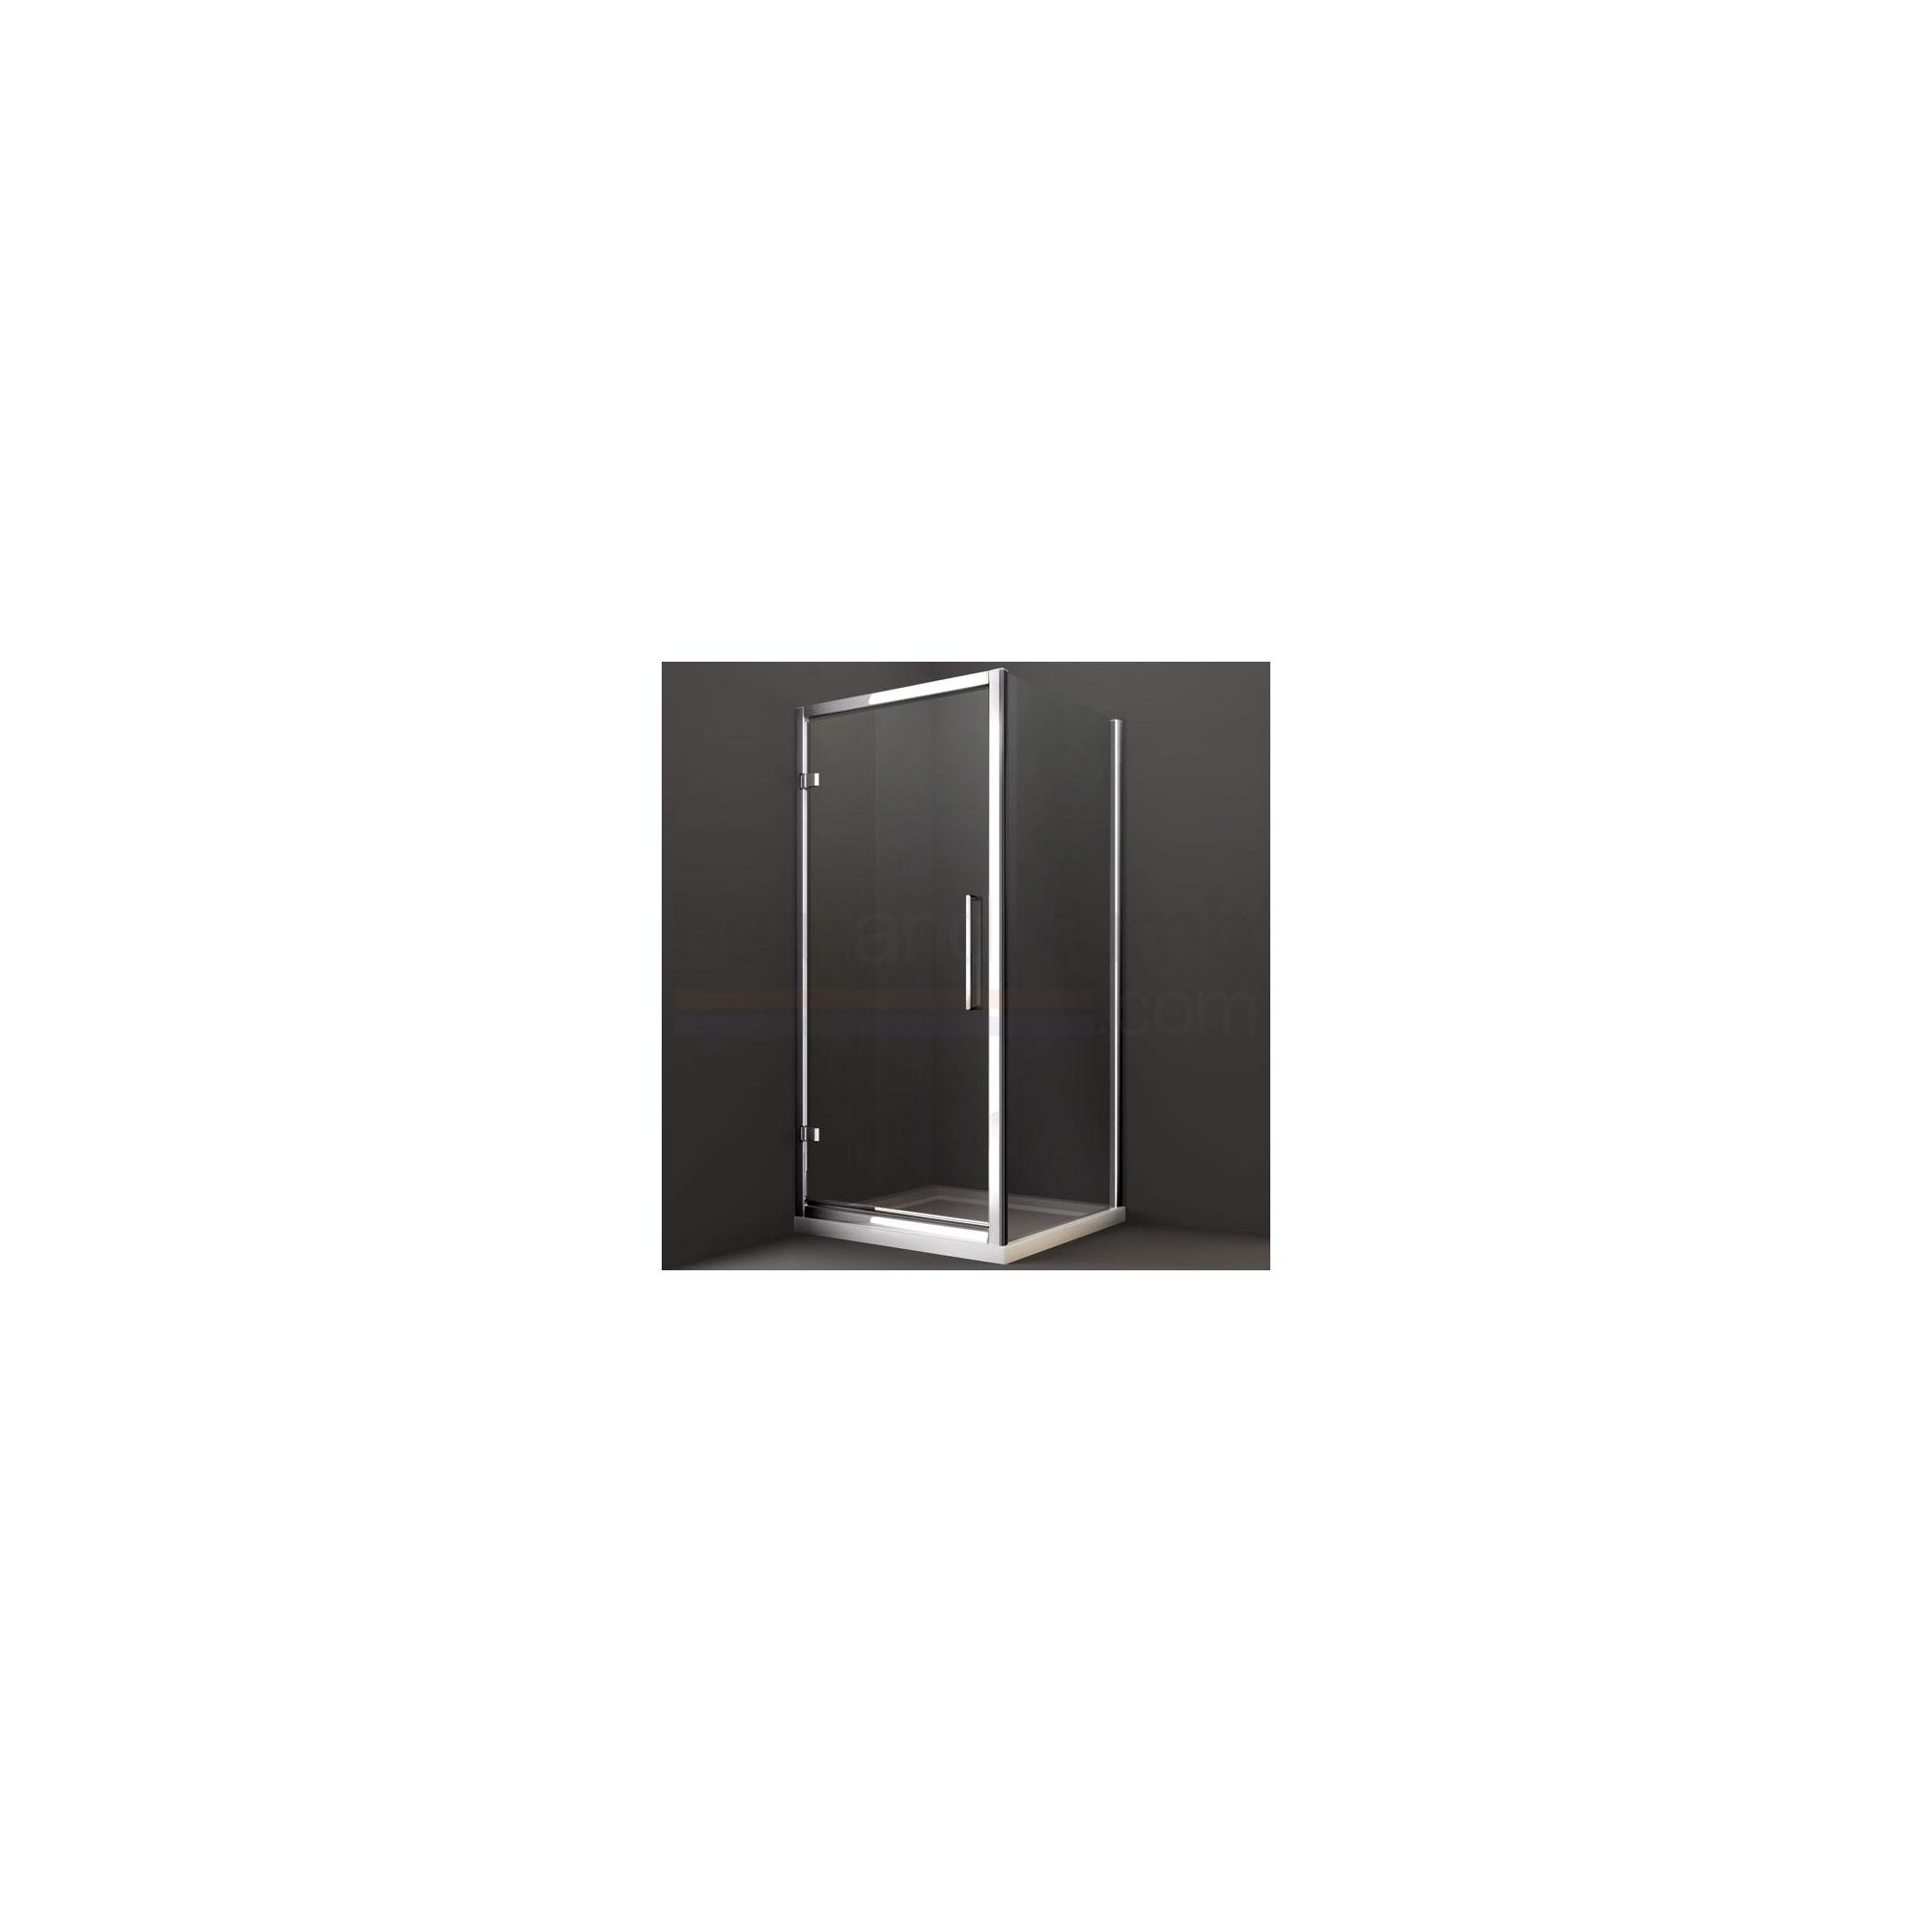 Merlyn Series 8 Hinged Door with Side Panel Shower Enclosure, 900mm, Low Profile Tray, 8mm Glass at Tesco Direct